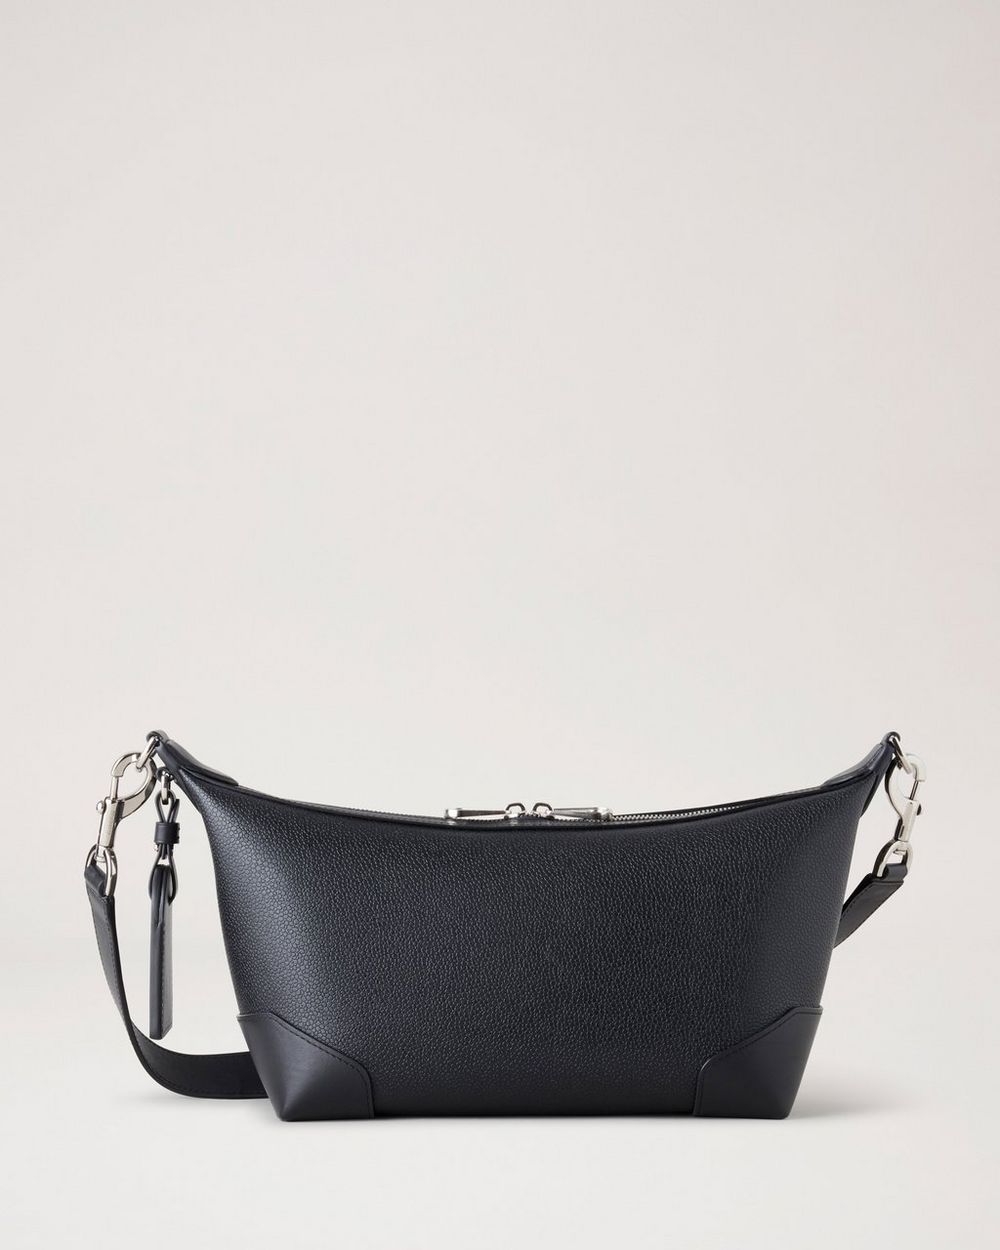 Mulberry Crossbody Bags for Women